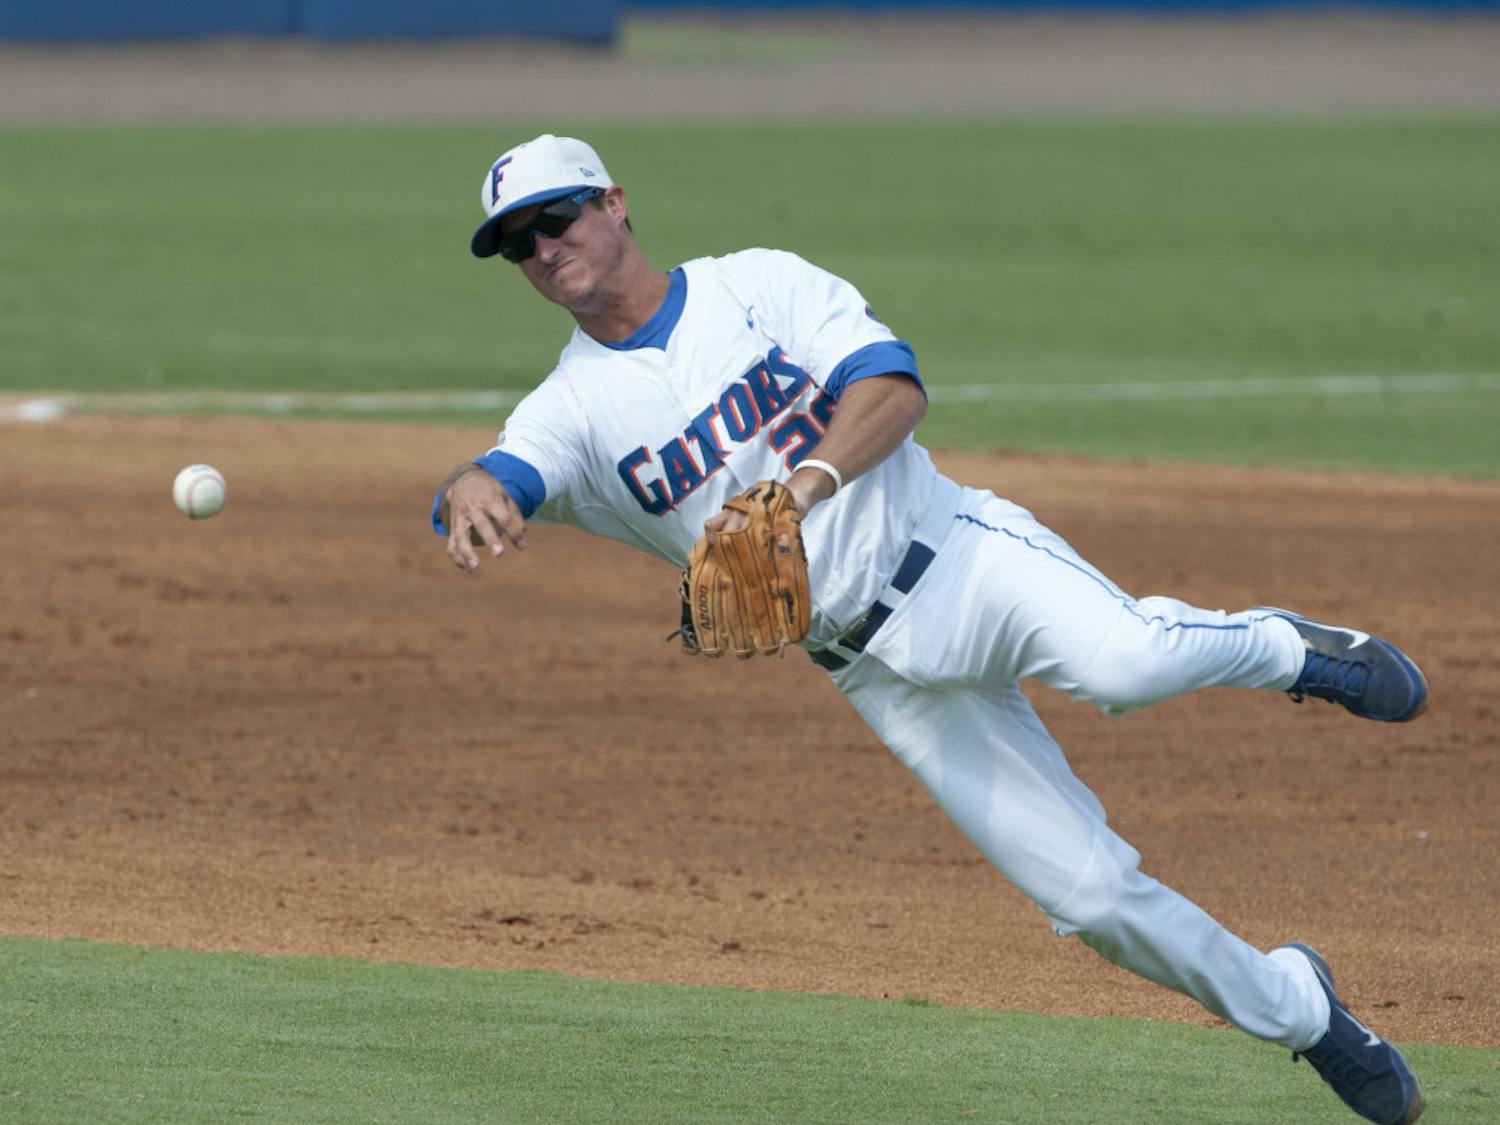 Gators third baseman Cody Dent has become a key cog during Florida's championship quest. The sophomore has solidified the hot corner with his slick glove work and his renewed offensive approach.